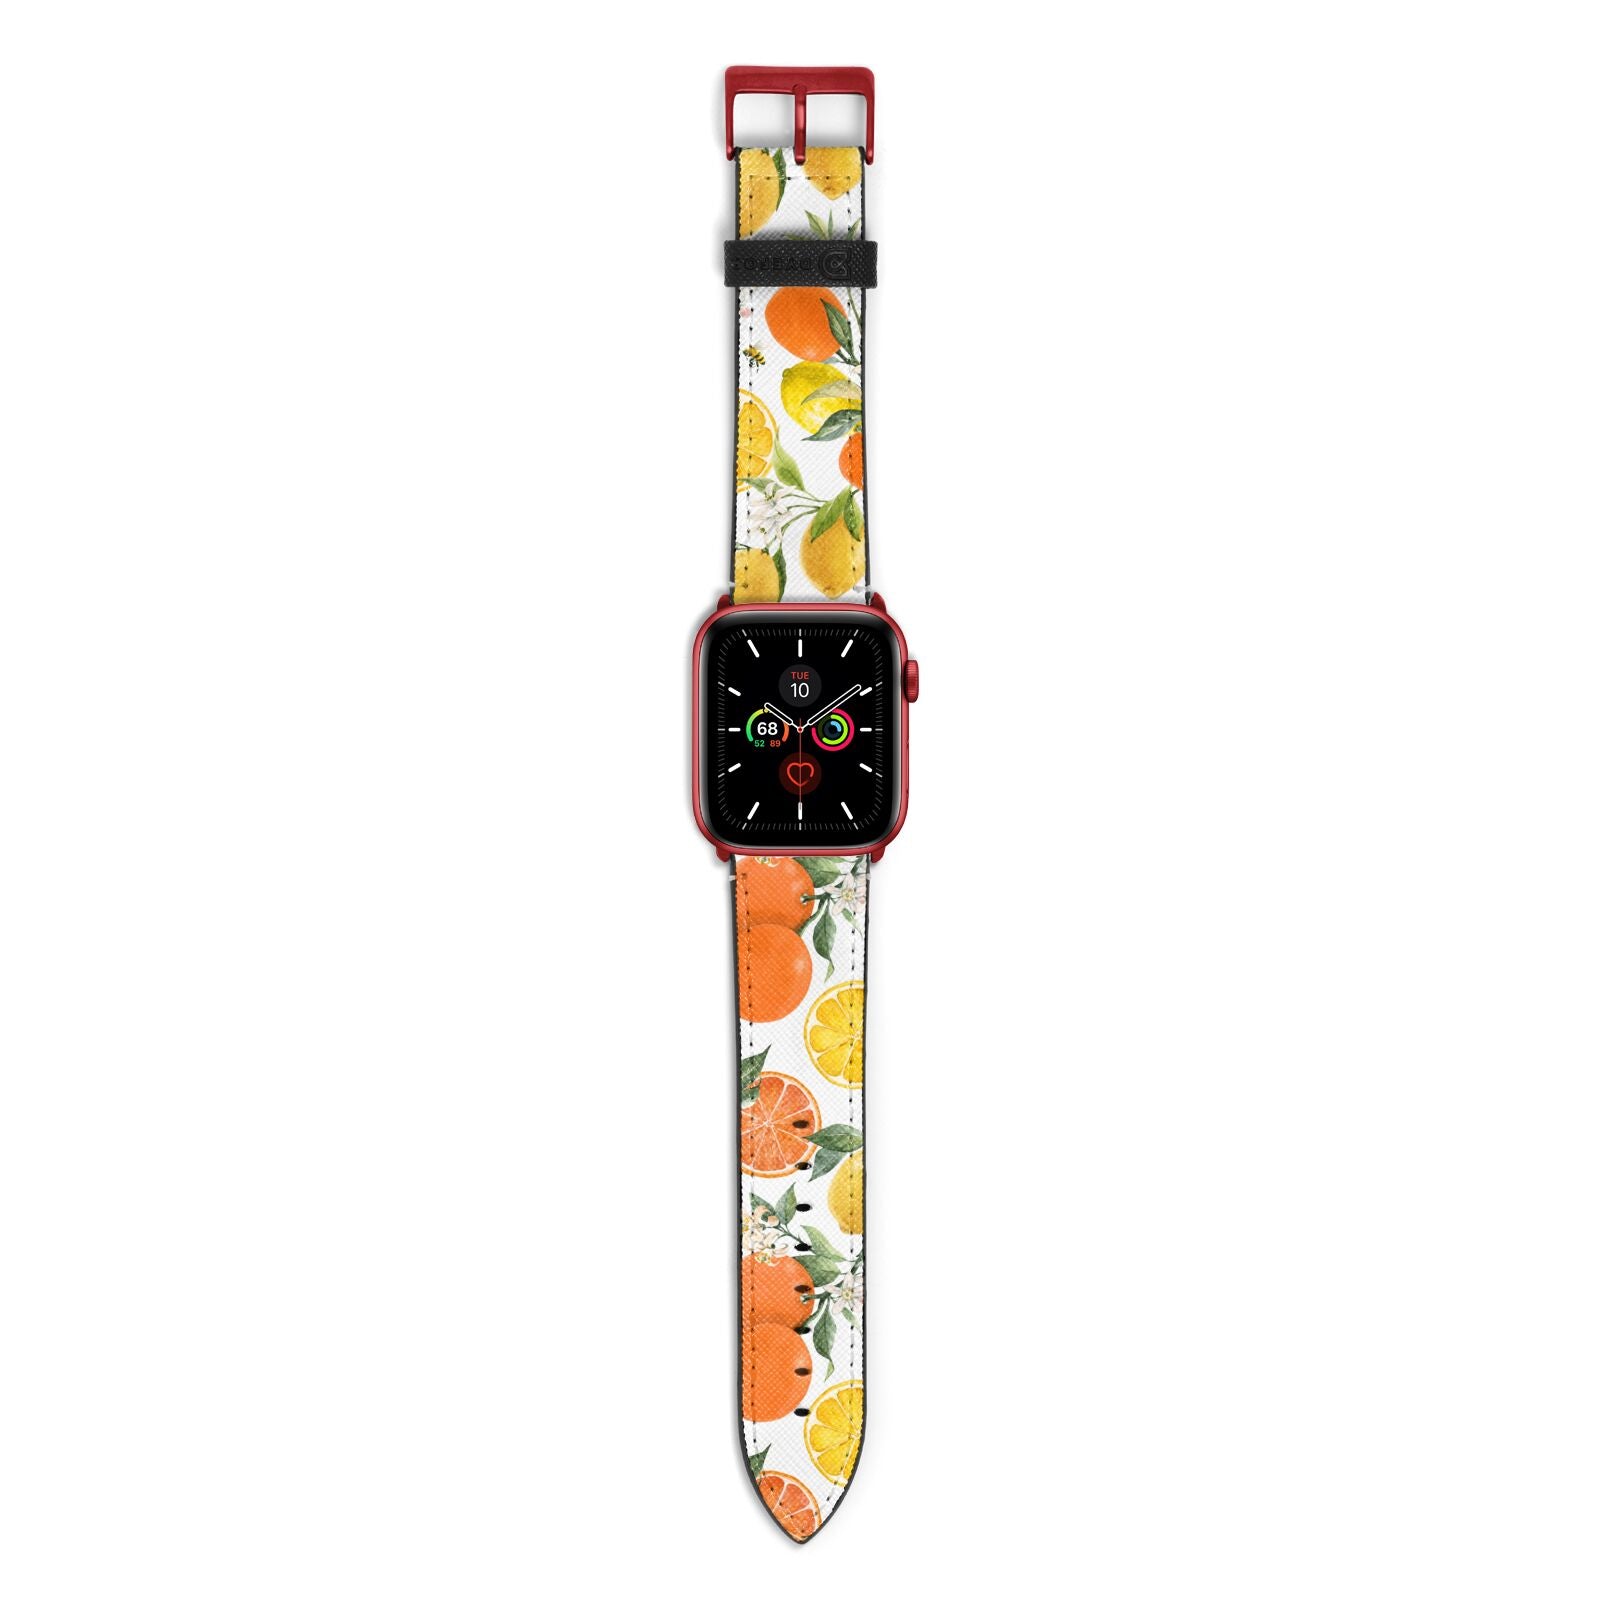 Lemons and Oranges Apple Watch Strap with Red Hardware